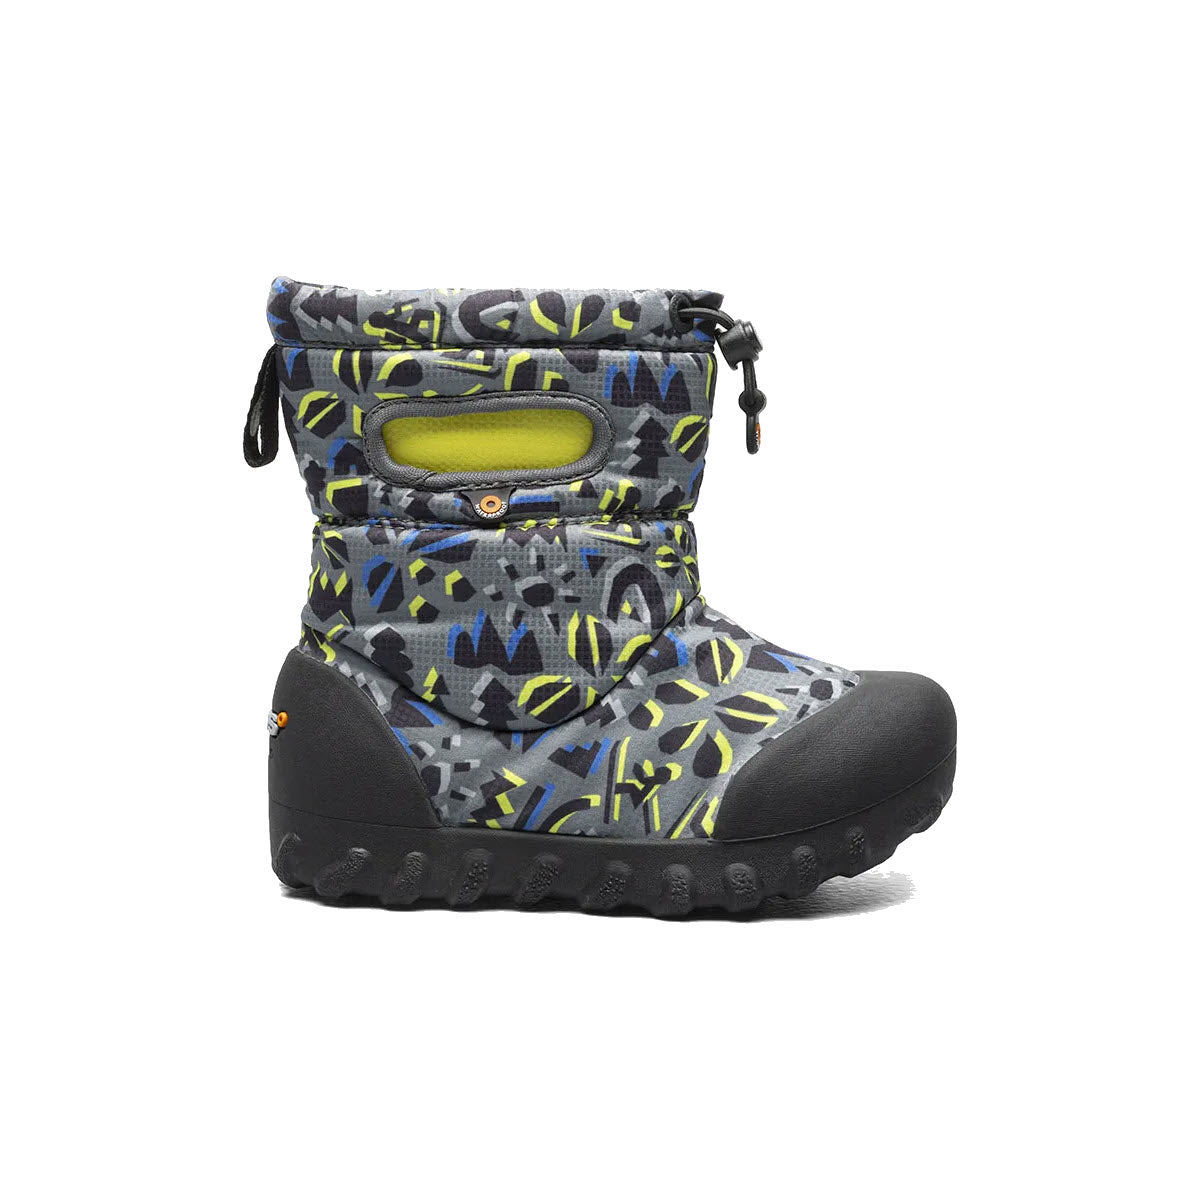 Patterned Bogs children's winter boot with velcro closure on a white background, designed as waterproof kids snow boots.